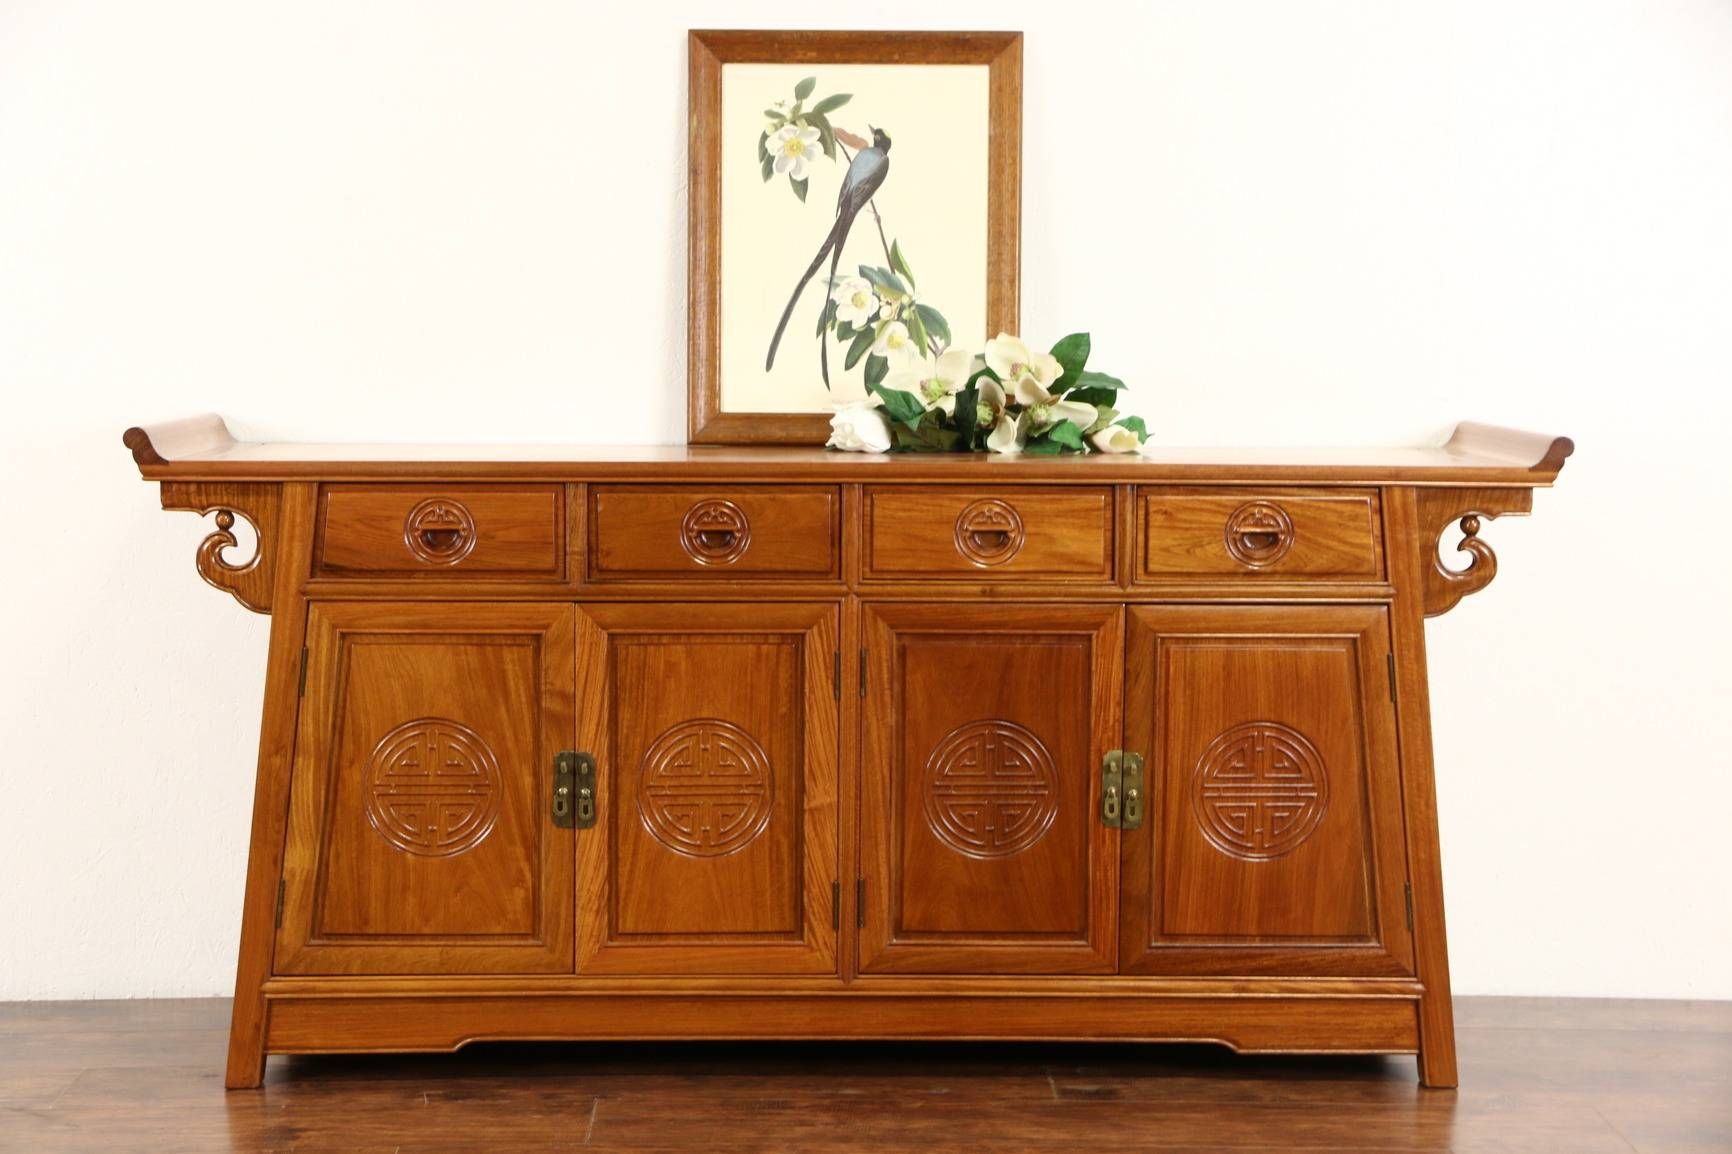 Sold – Asian Vintage Hand Carved Rosewood Sideboard Server Or Intended For Asian Sideboards (View 20 of 20)